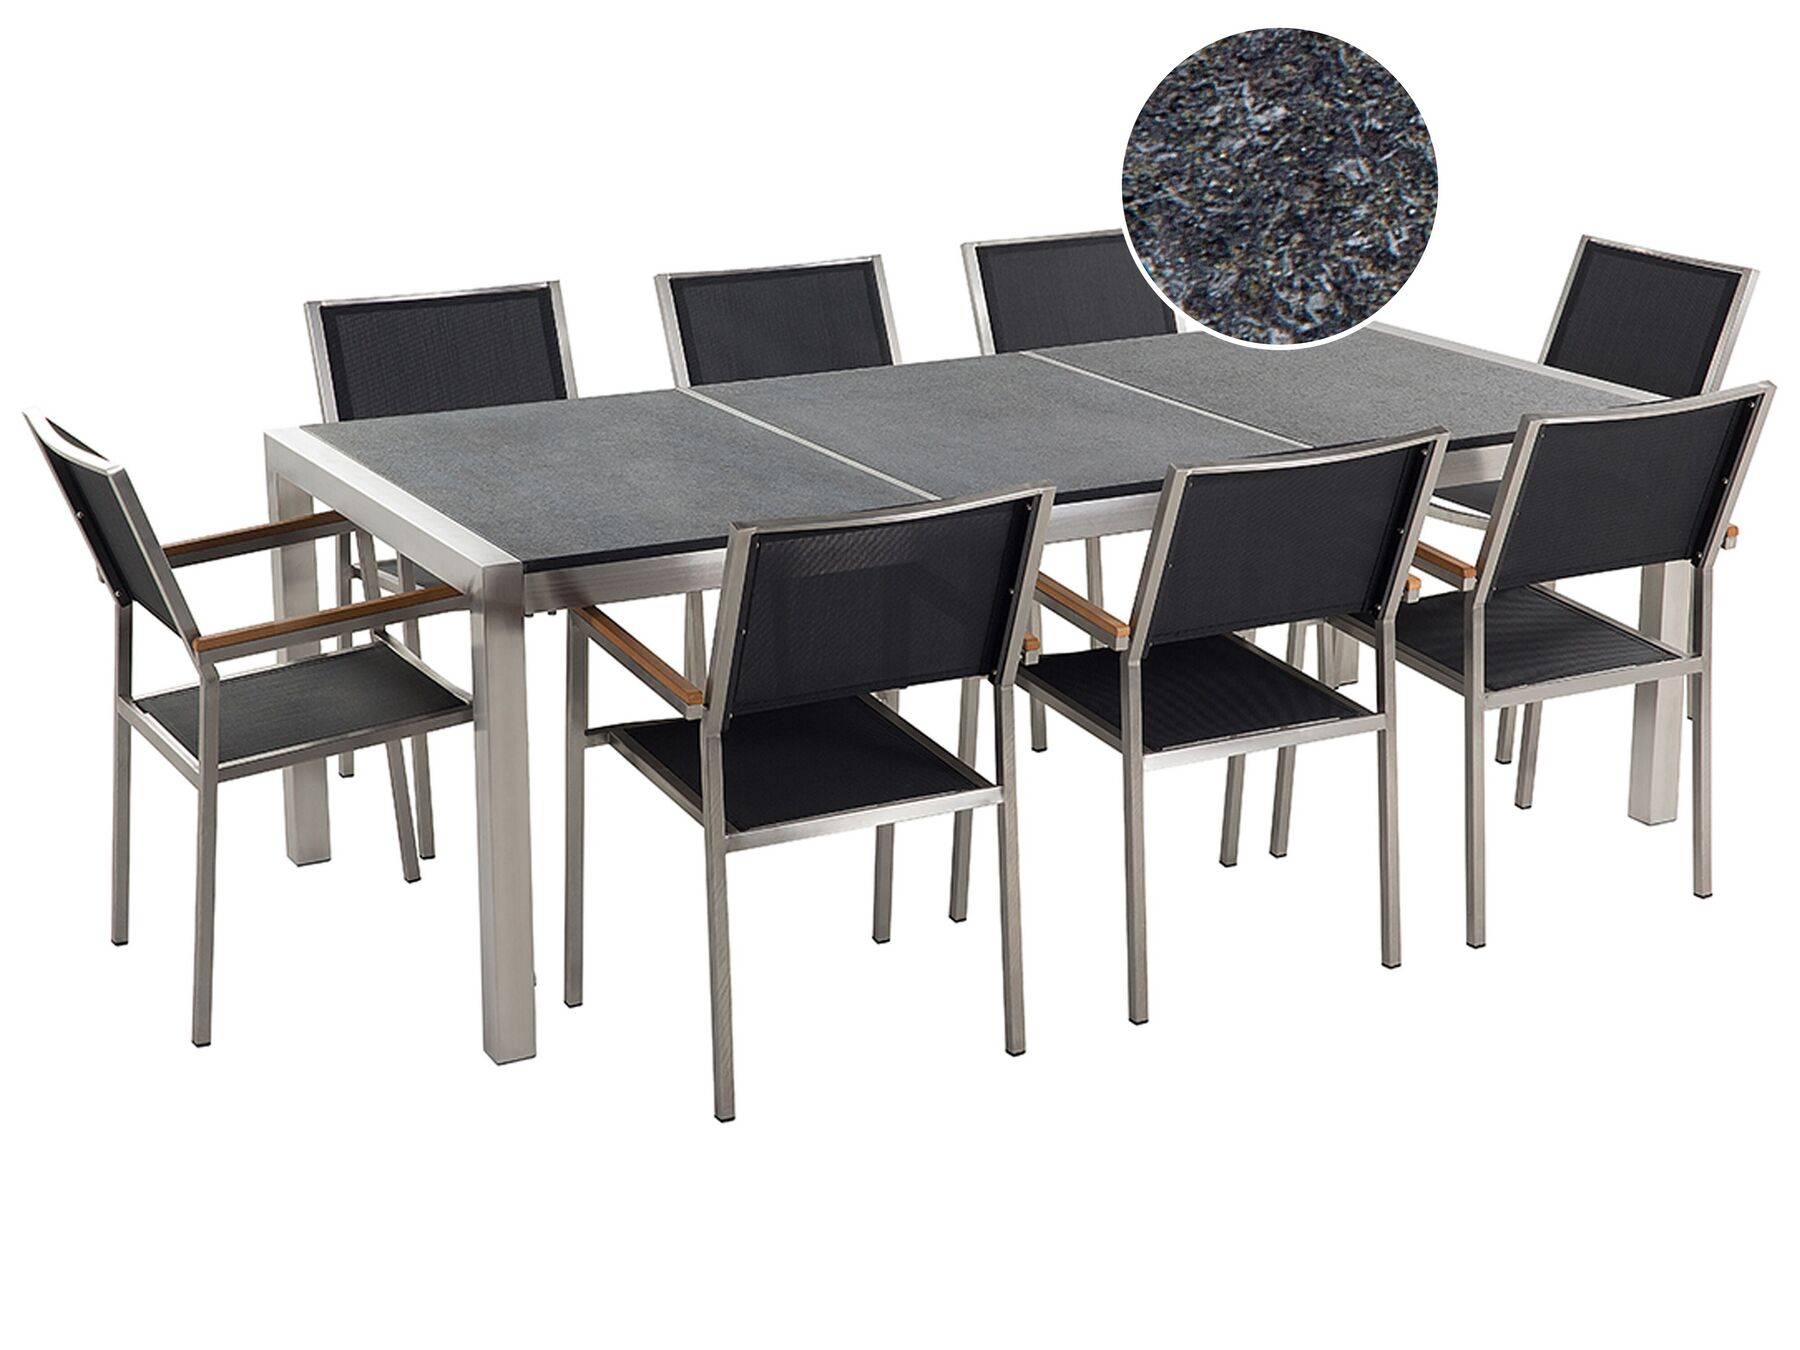 8 Seater Garden Dining Set Black Granite Triple Plate Top with Black Chairs GROSSETO_452970